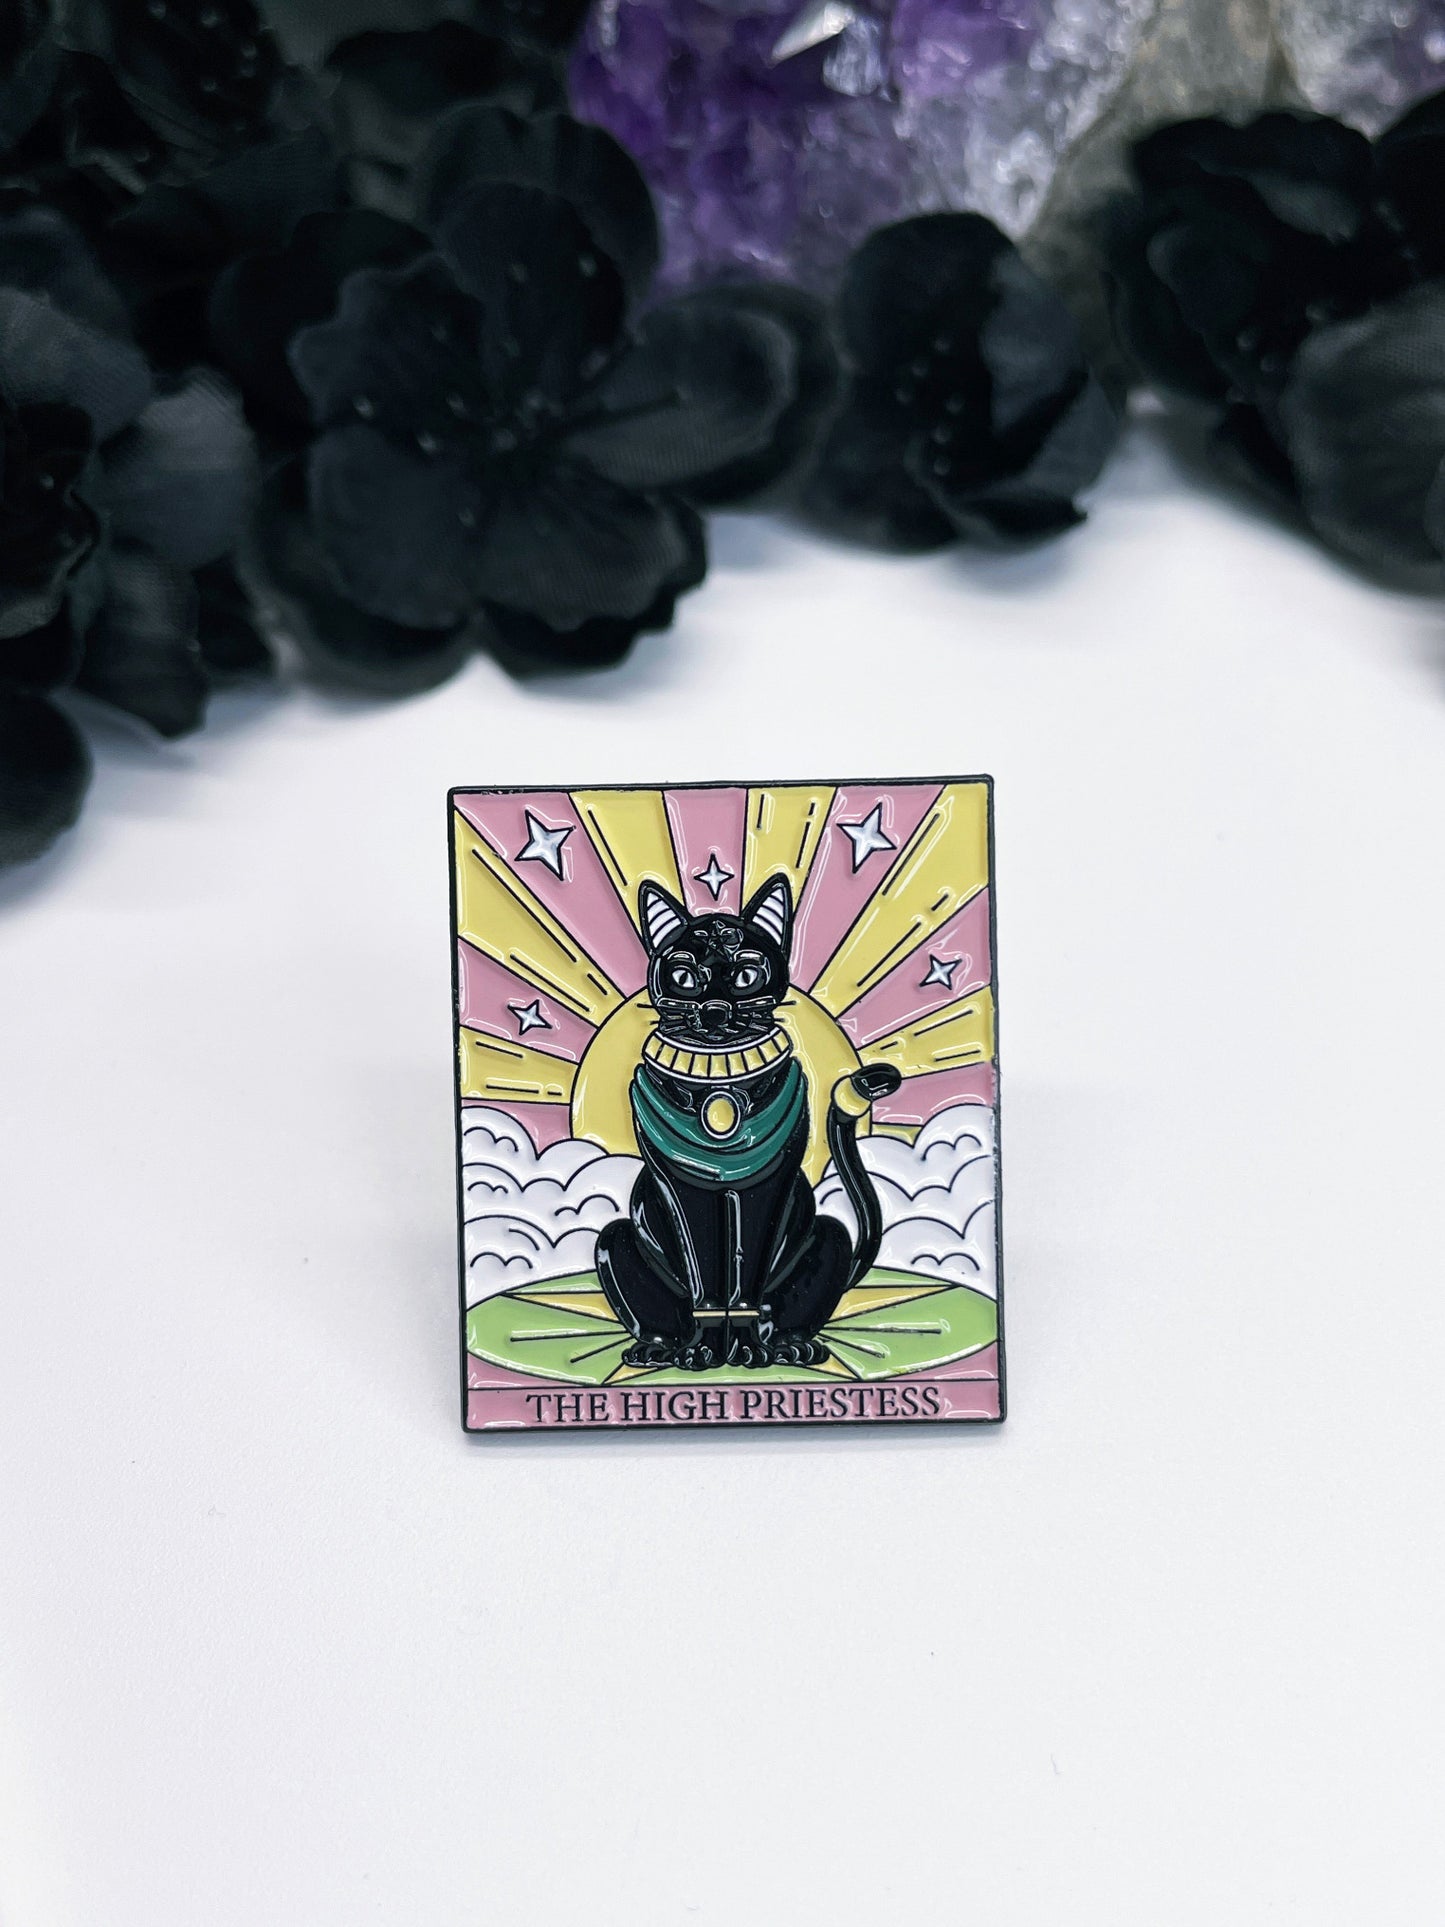  An enamel pin featuring a tarot card with a black cat on it, the card is "The High Priestess."